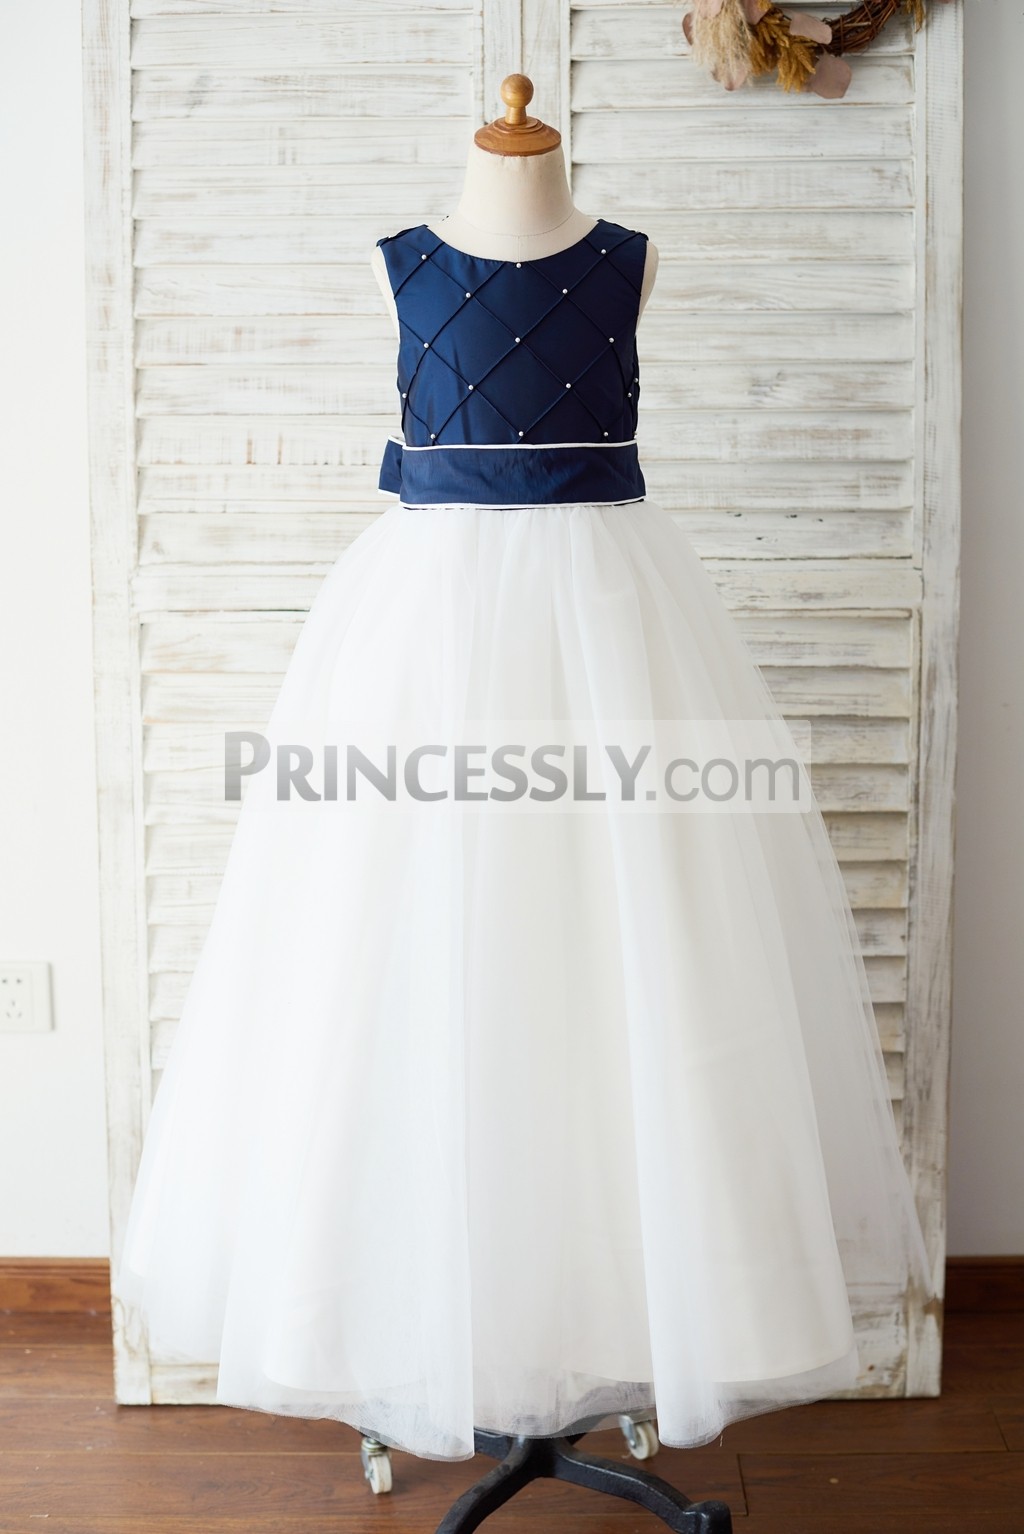 Princessly.com-K1003653-Navy Blue Taffeta Ivory Tulle Wedding Party Flower Girl Dress with Pearls-31